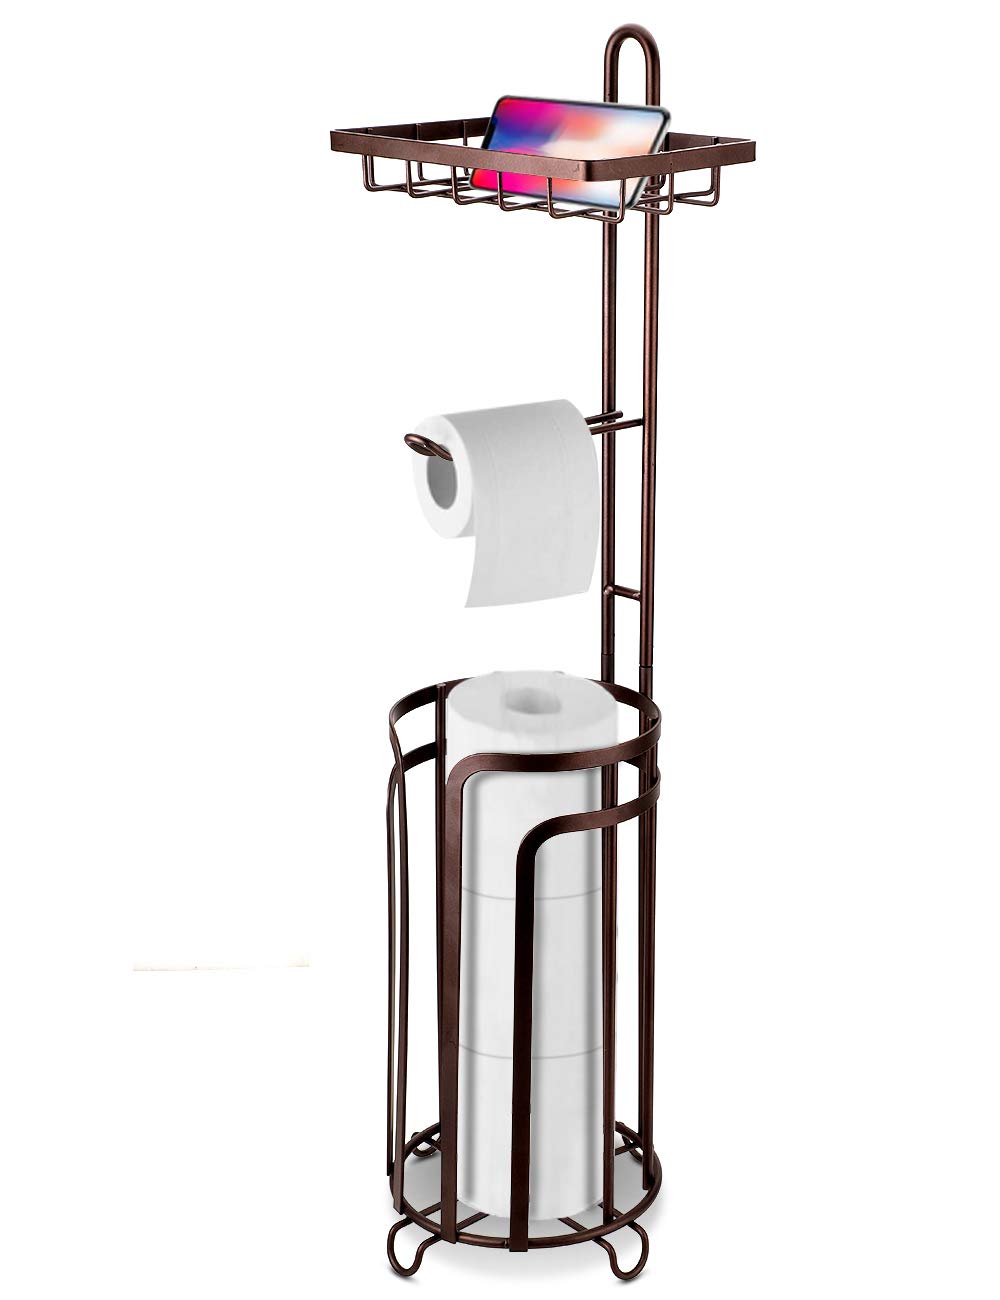 VEARMOAD Floor Toilet Tissue Paper Holder Stand